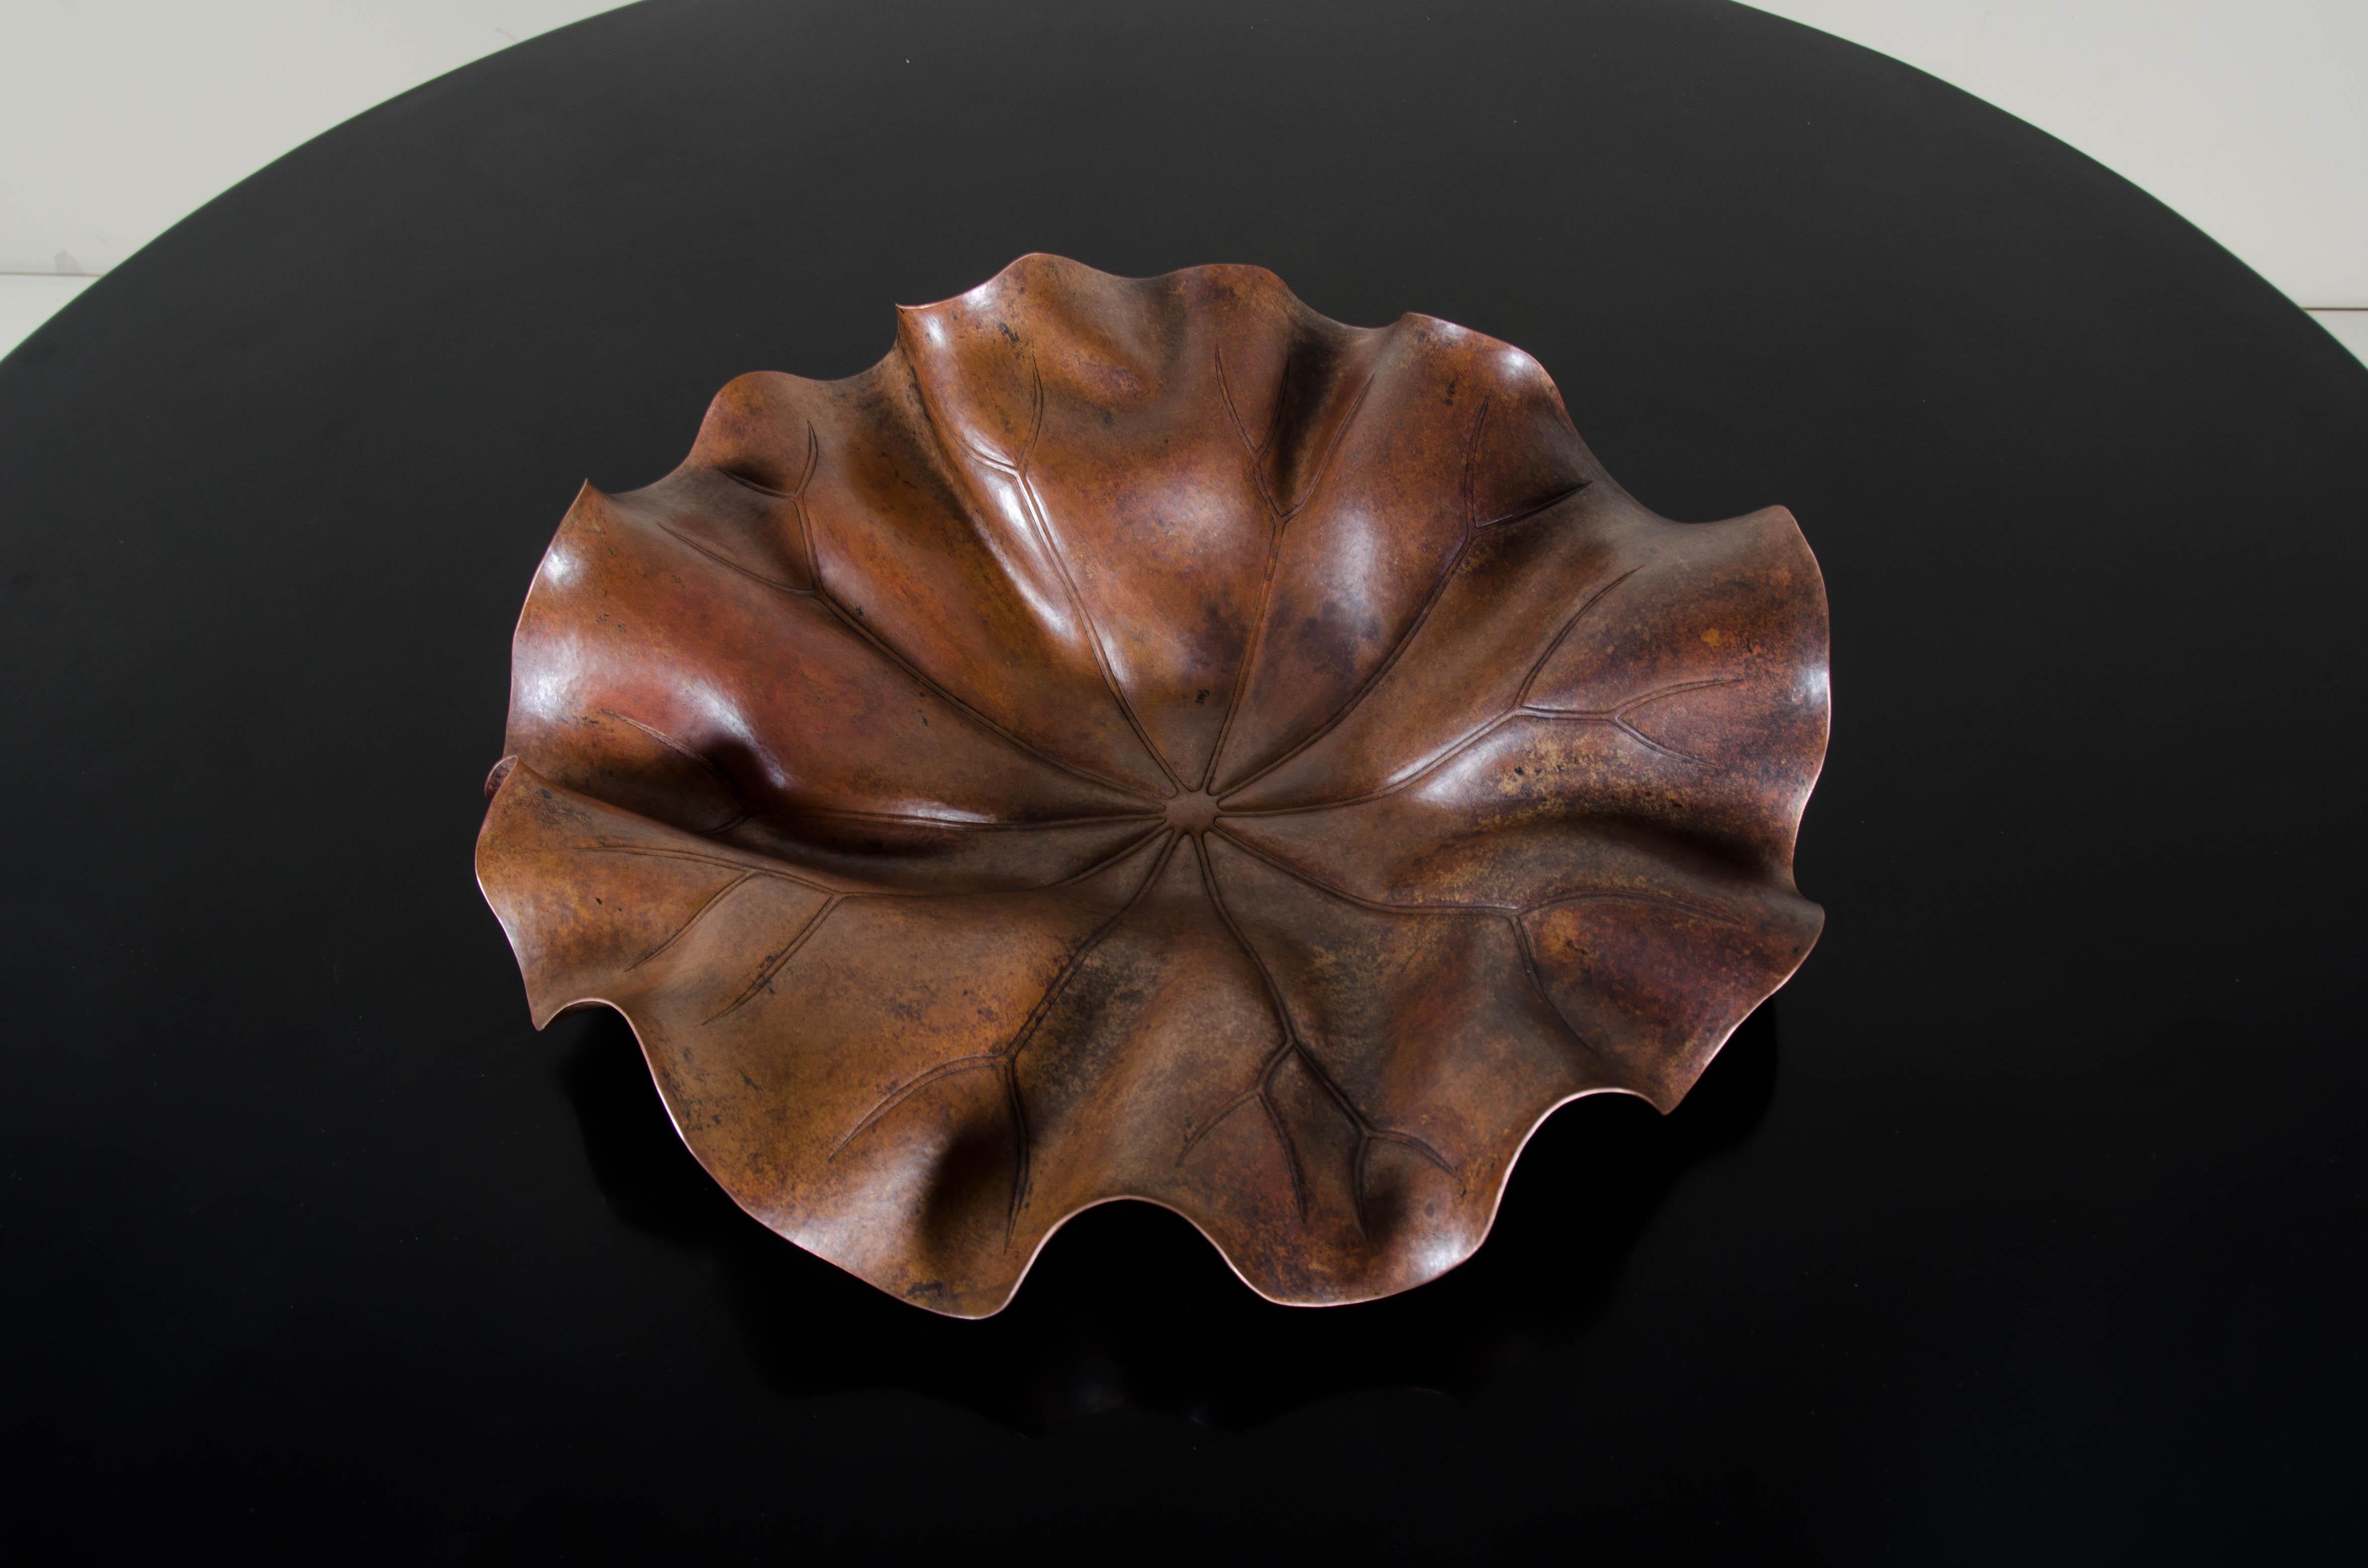 Lotus leaf plate
Antique copper
Hand repoussé
Limited edition

Repousse´ is the traditional art of hand-hammering decorative relief onto sheet metal. The technique originated around 800 BC between Asia and Europe and in Chinese historical